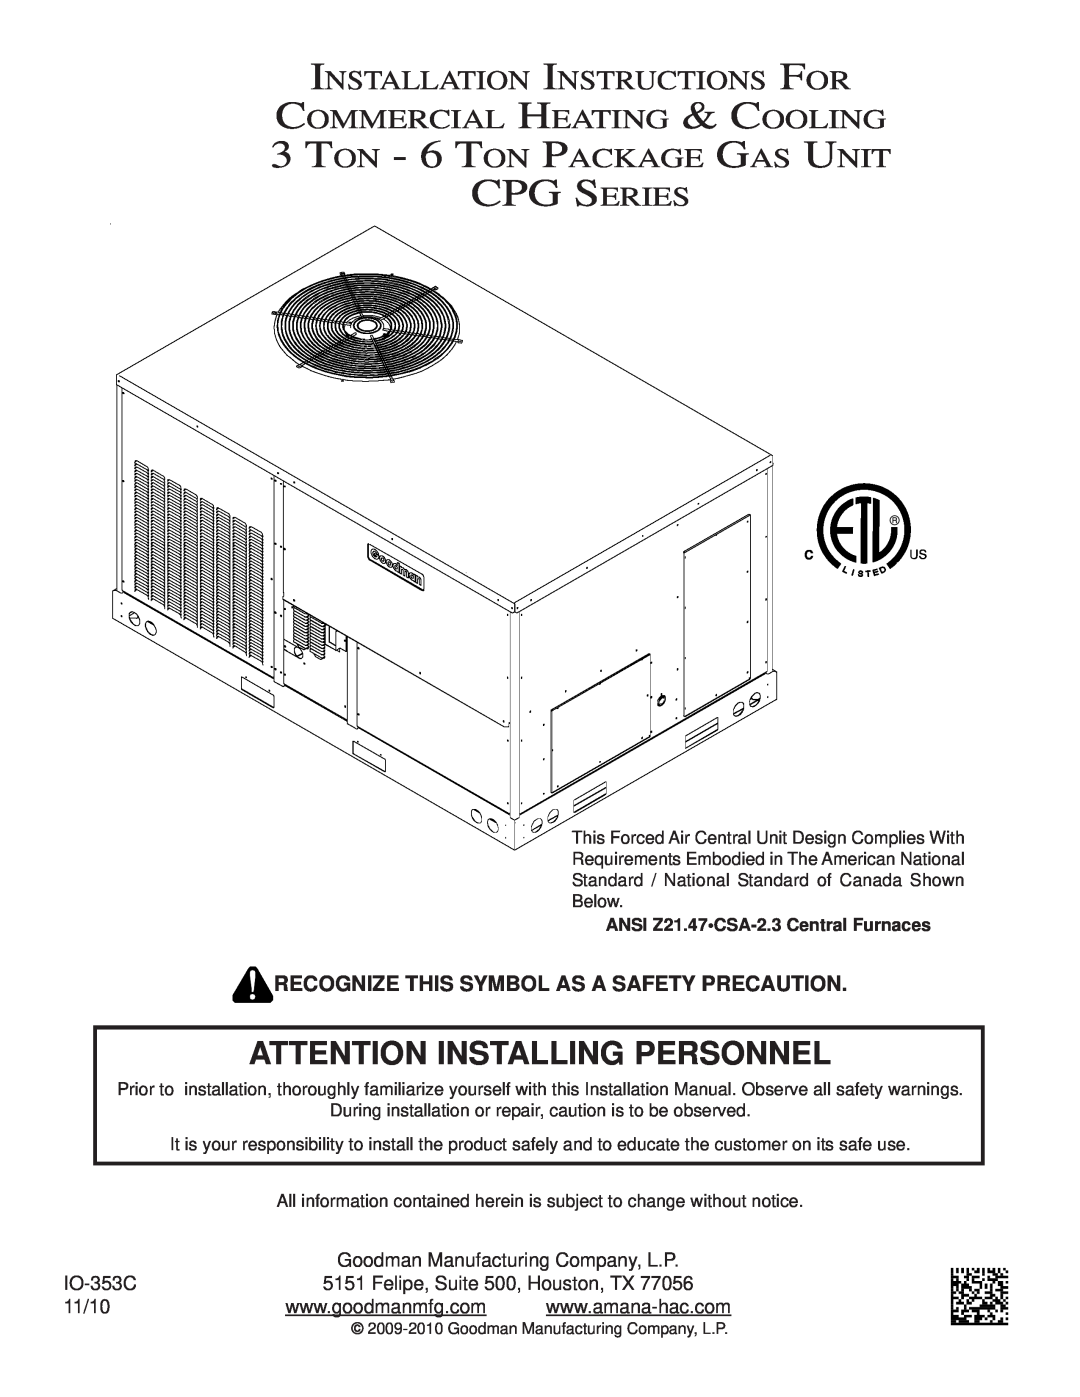 Goodman Mfg CPG SERIES installation manual Cpg Series, Attention Installing Personnel, Installation Instructions For 